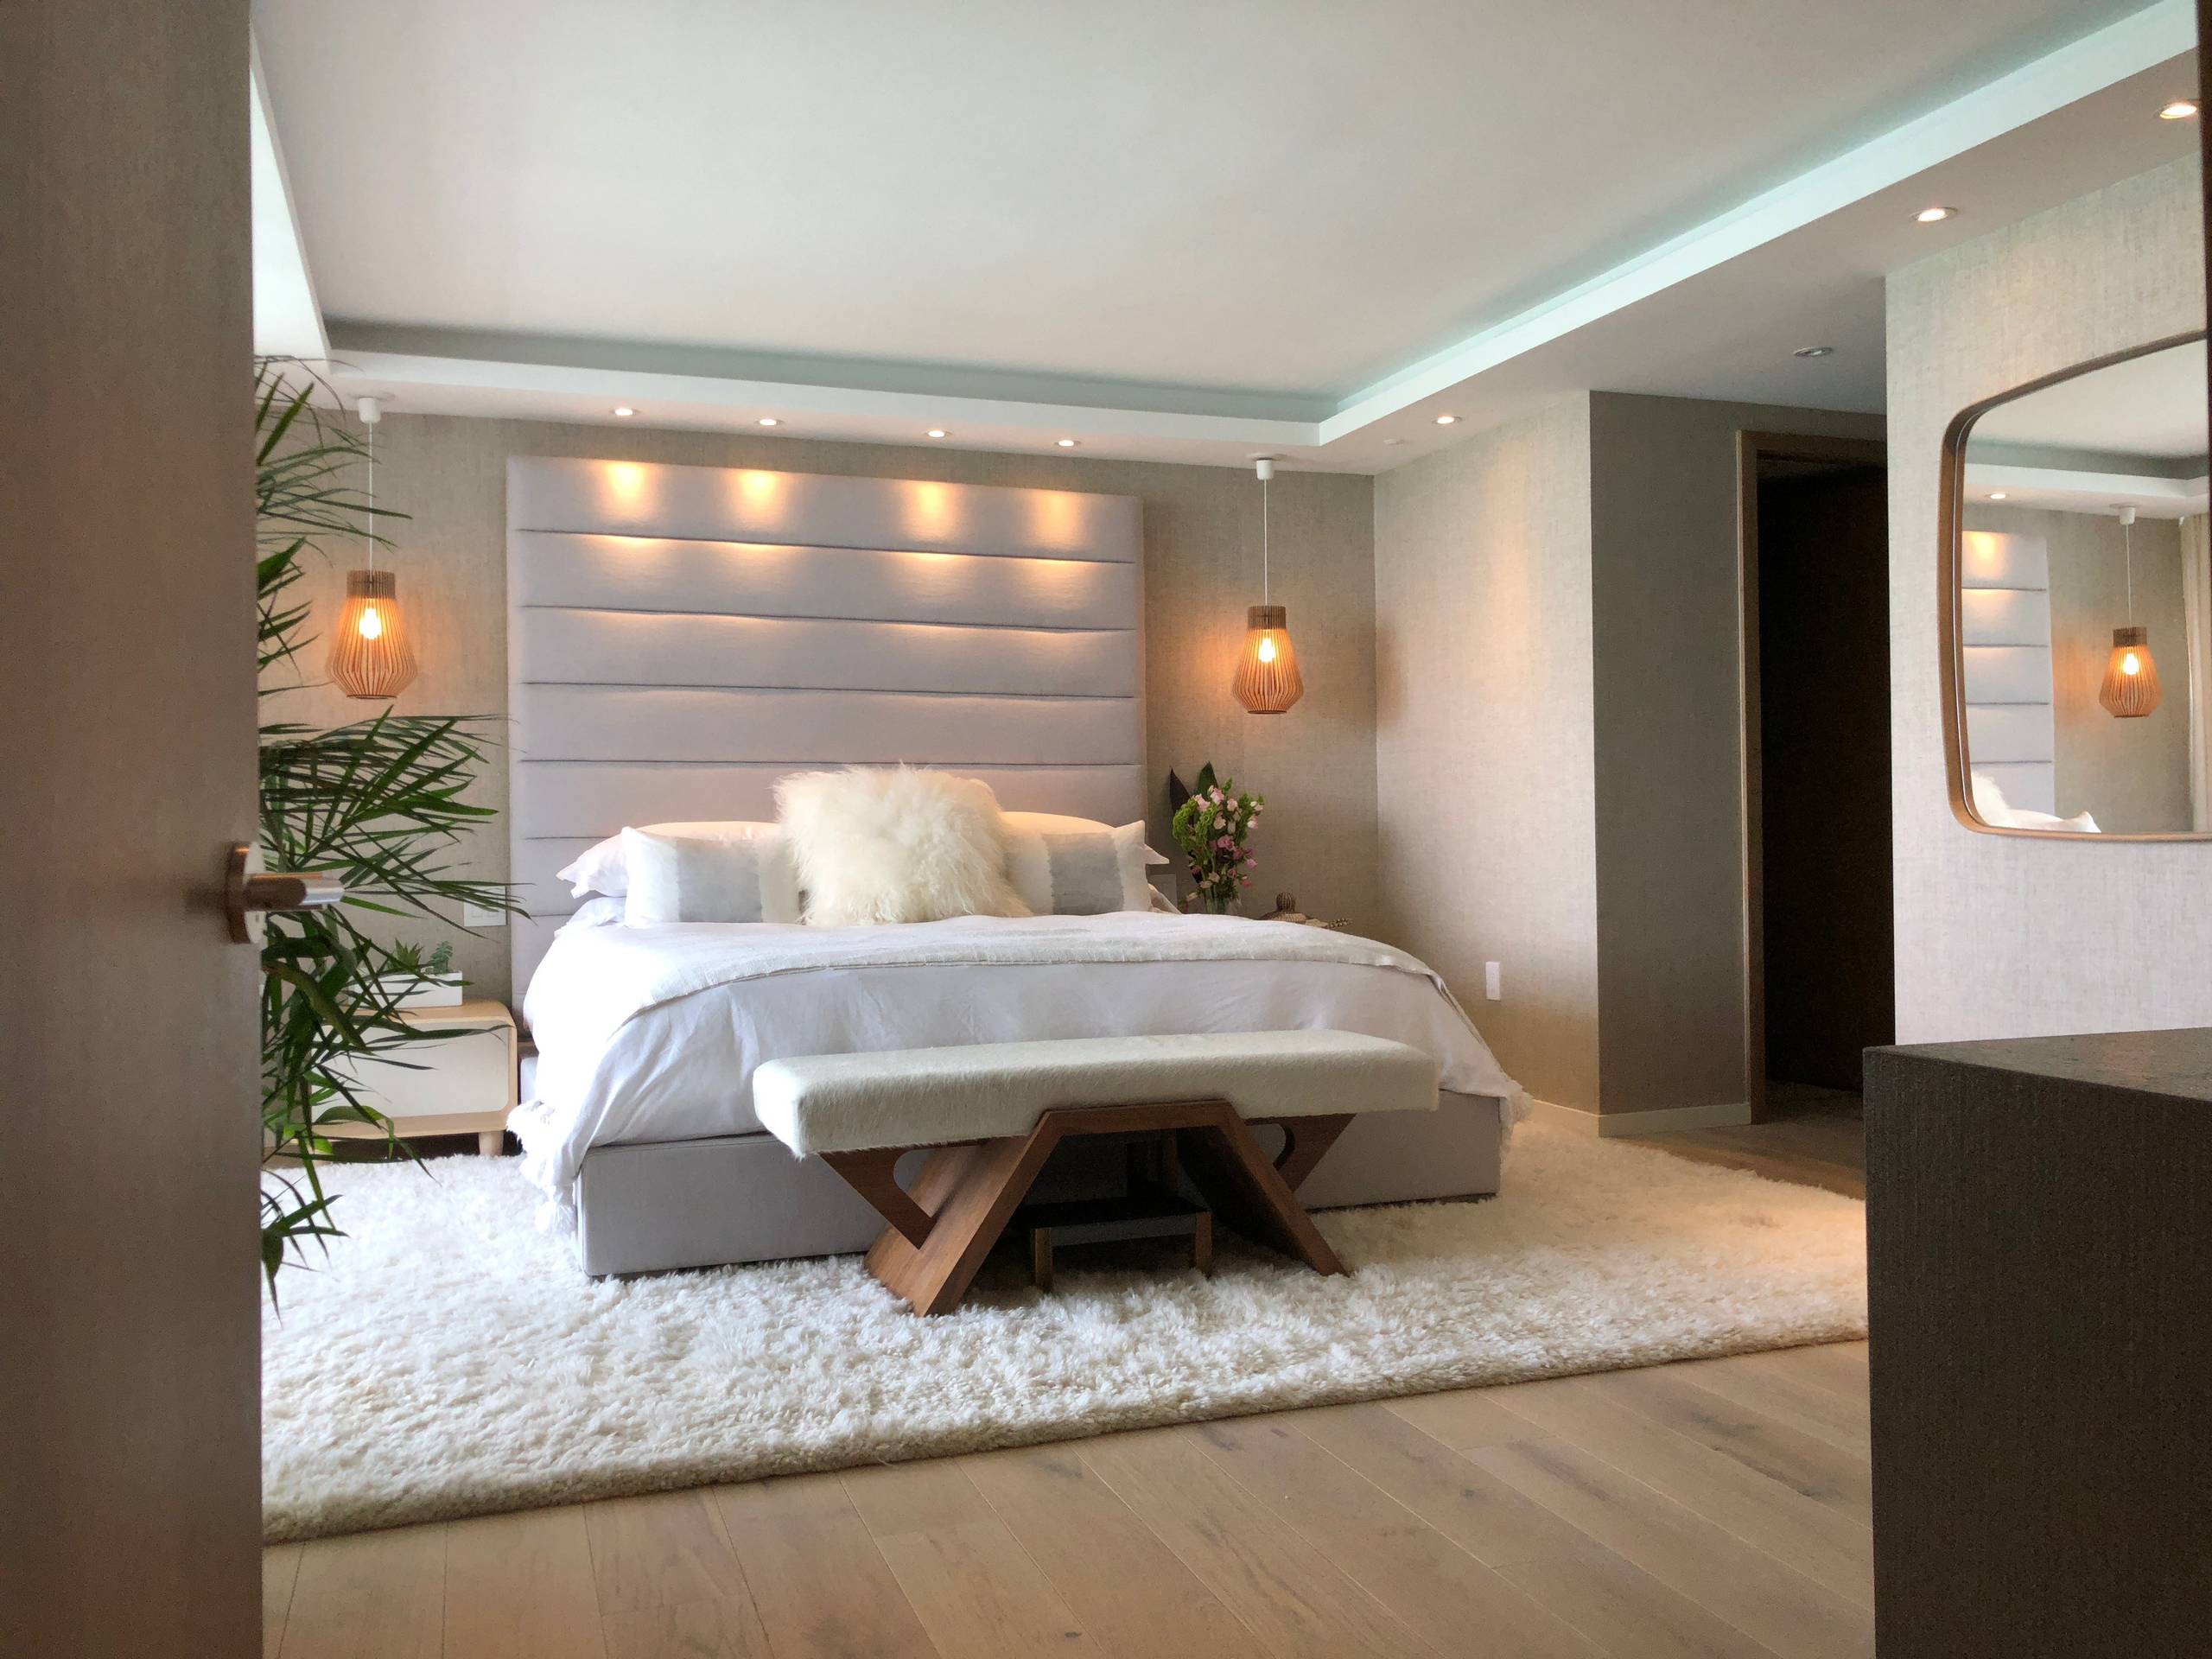 75 Modern Bedroom Ideas You'll Love - May, 2023 | Houzz